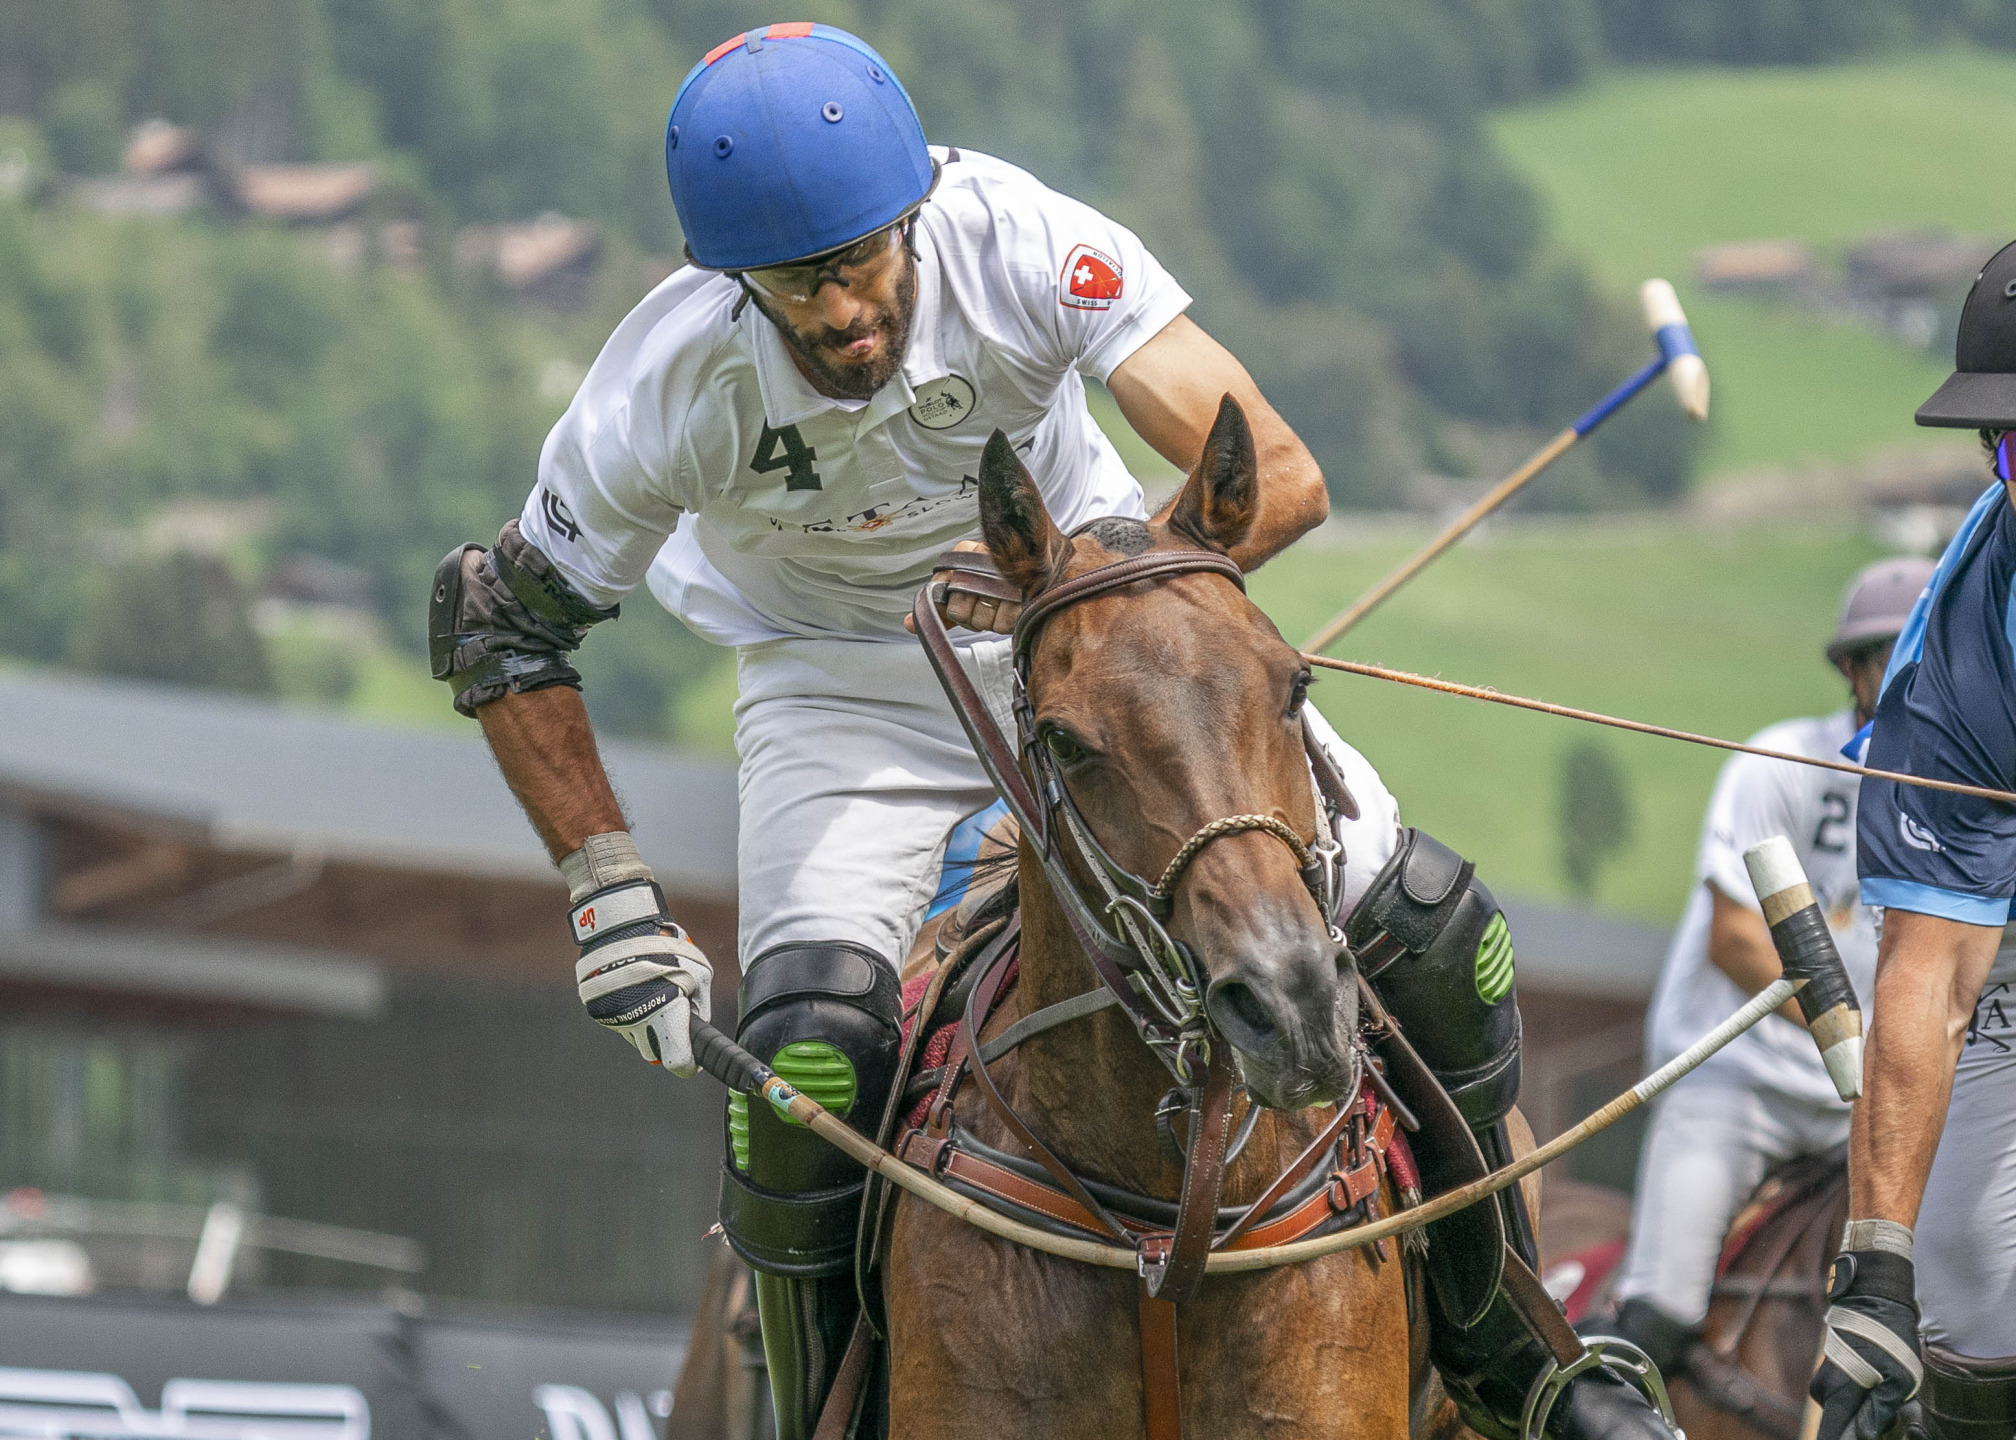 Raul Laplacette (Gstaad Polo), omnipresent on the field today